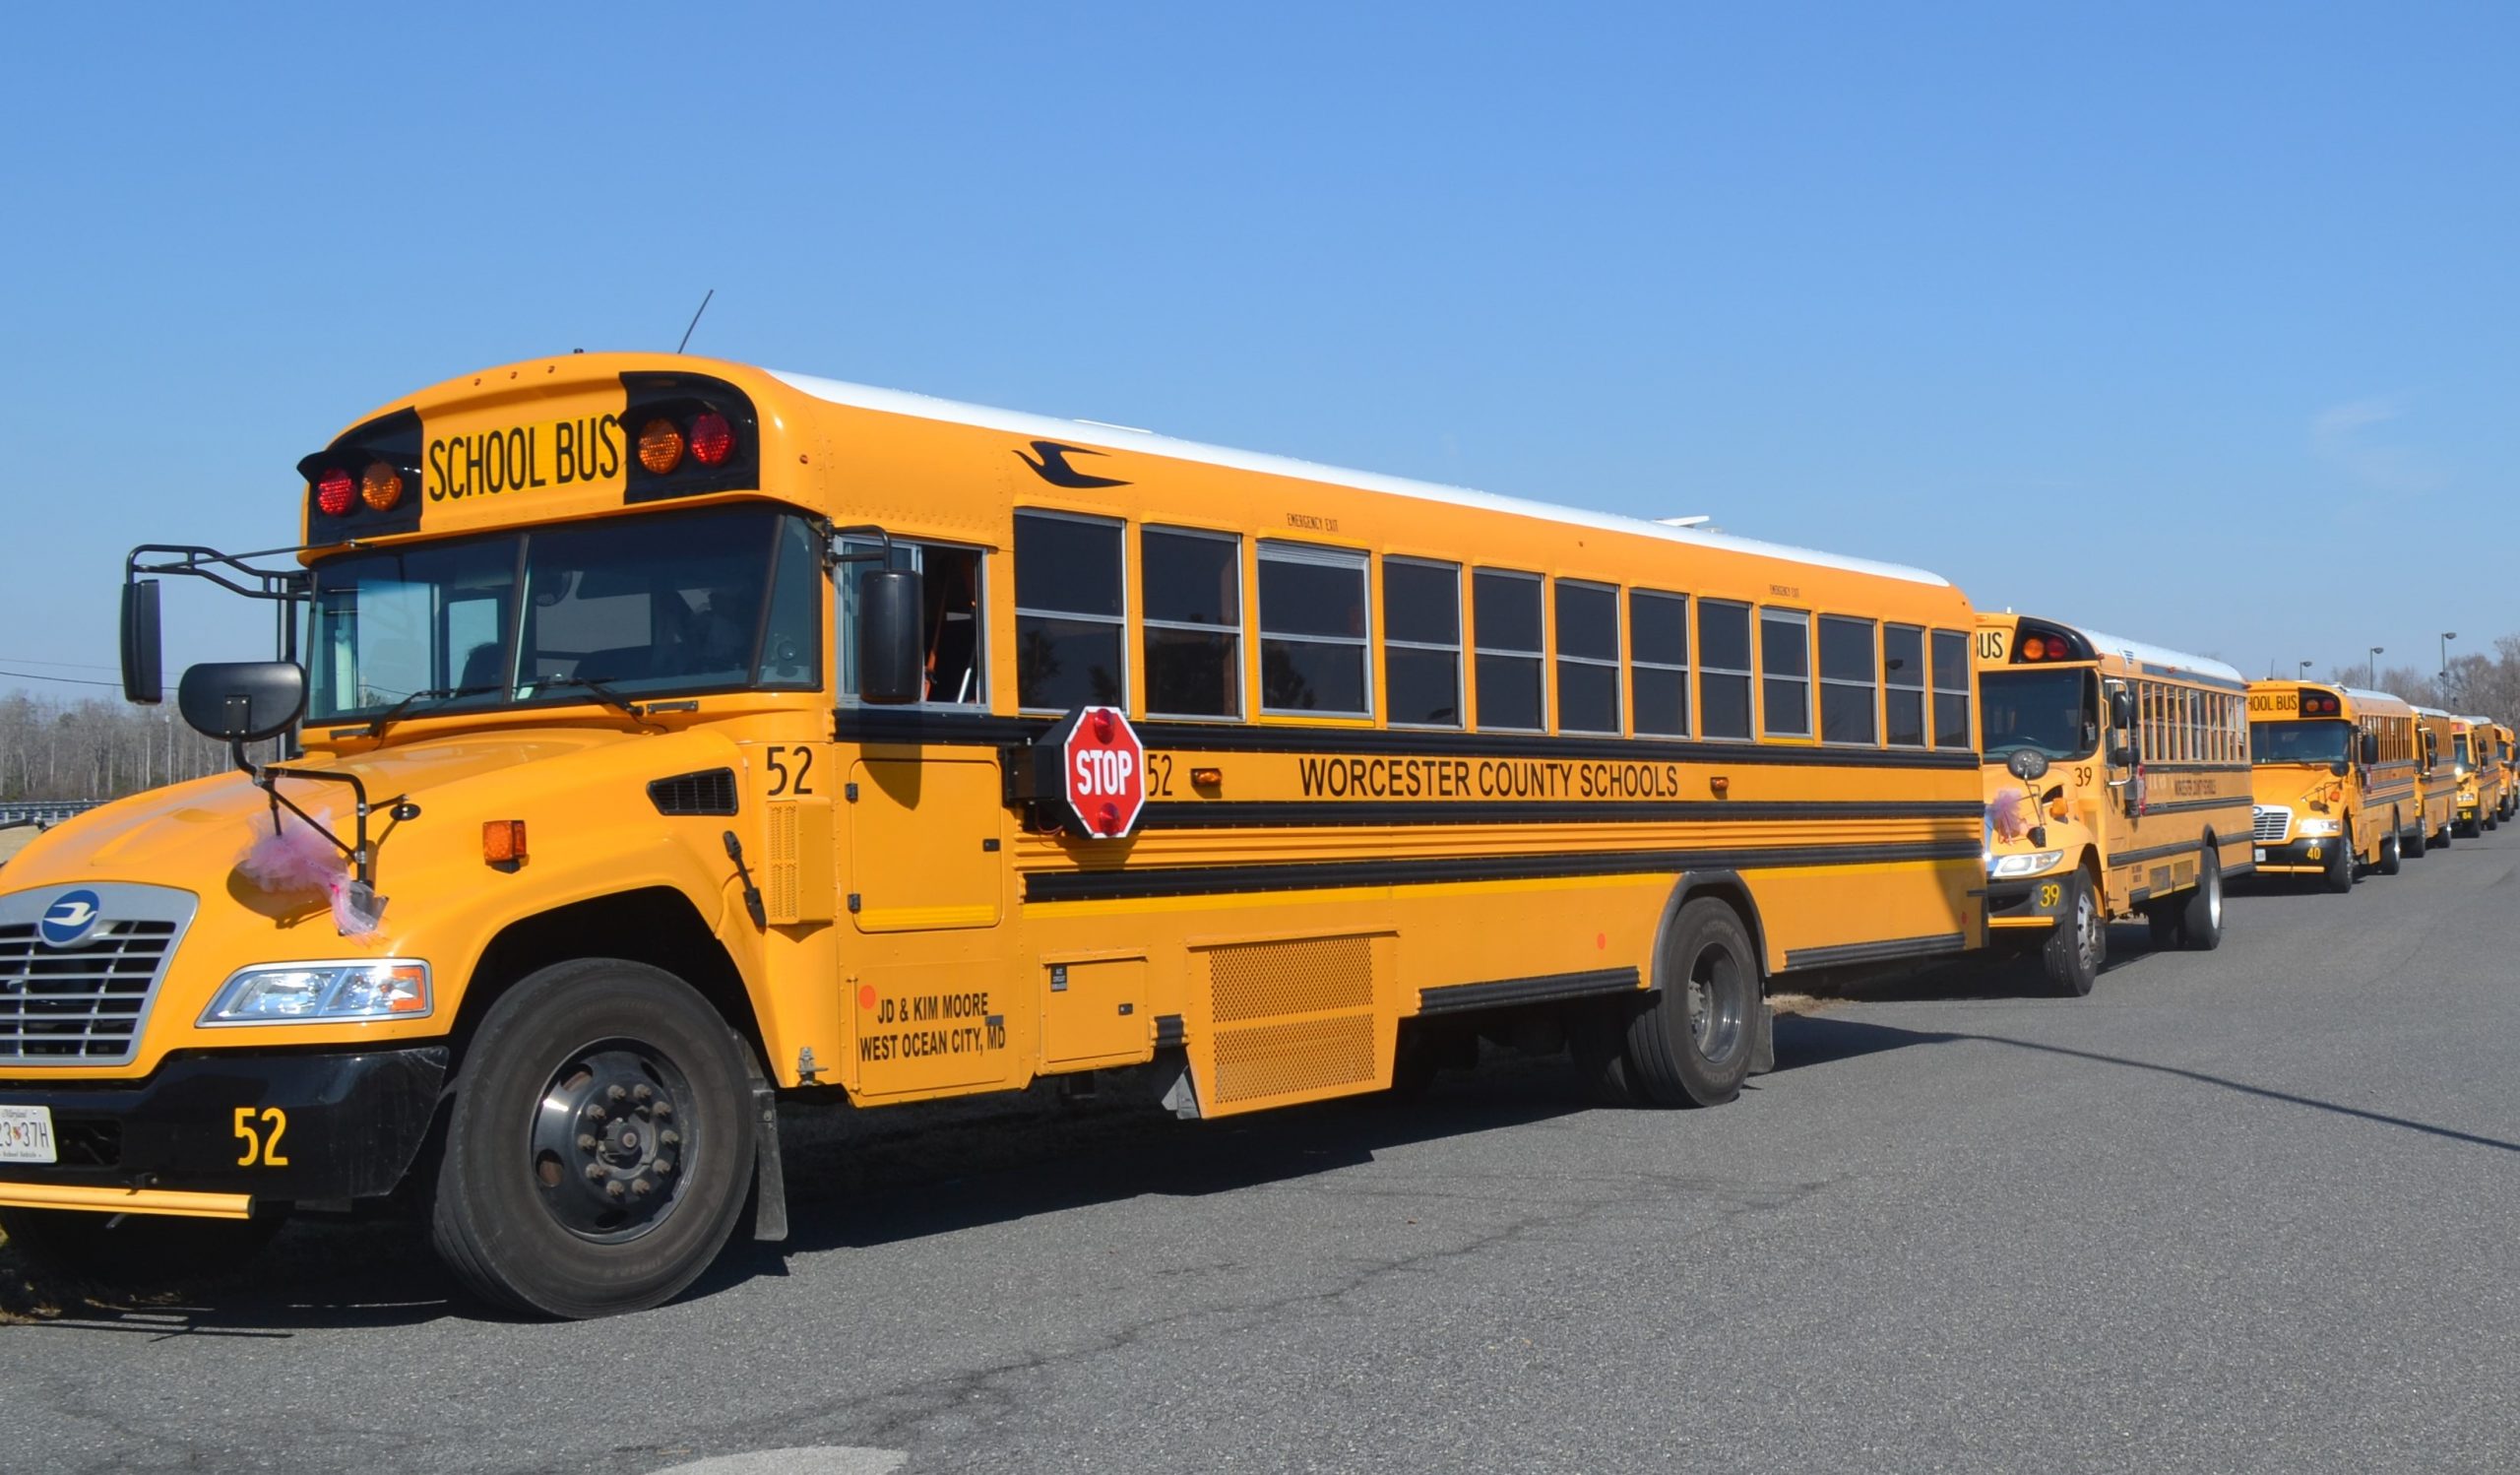 School board stands by decision not to raise bus driver wages further